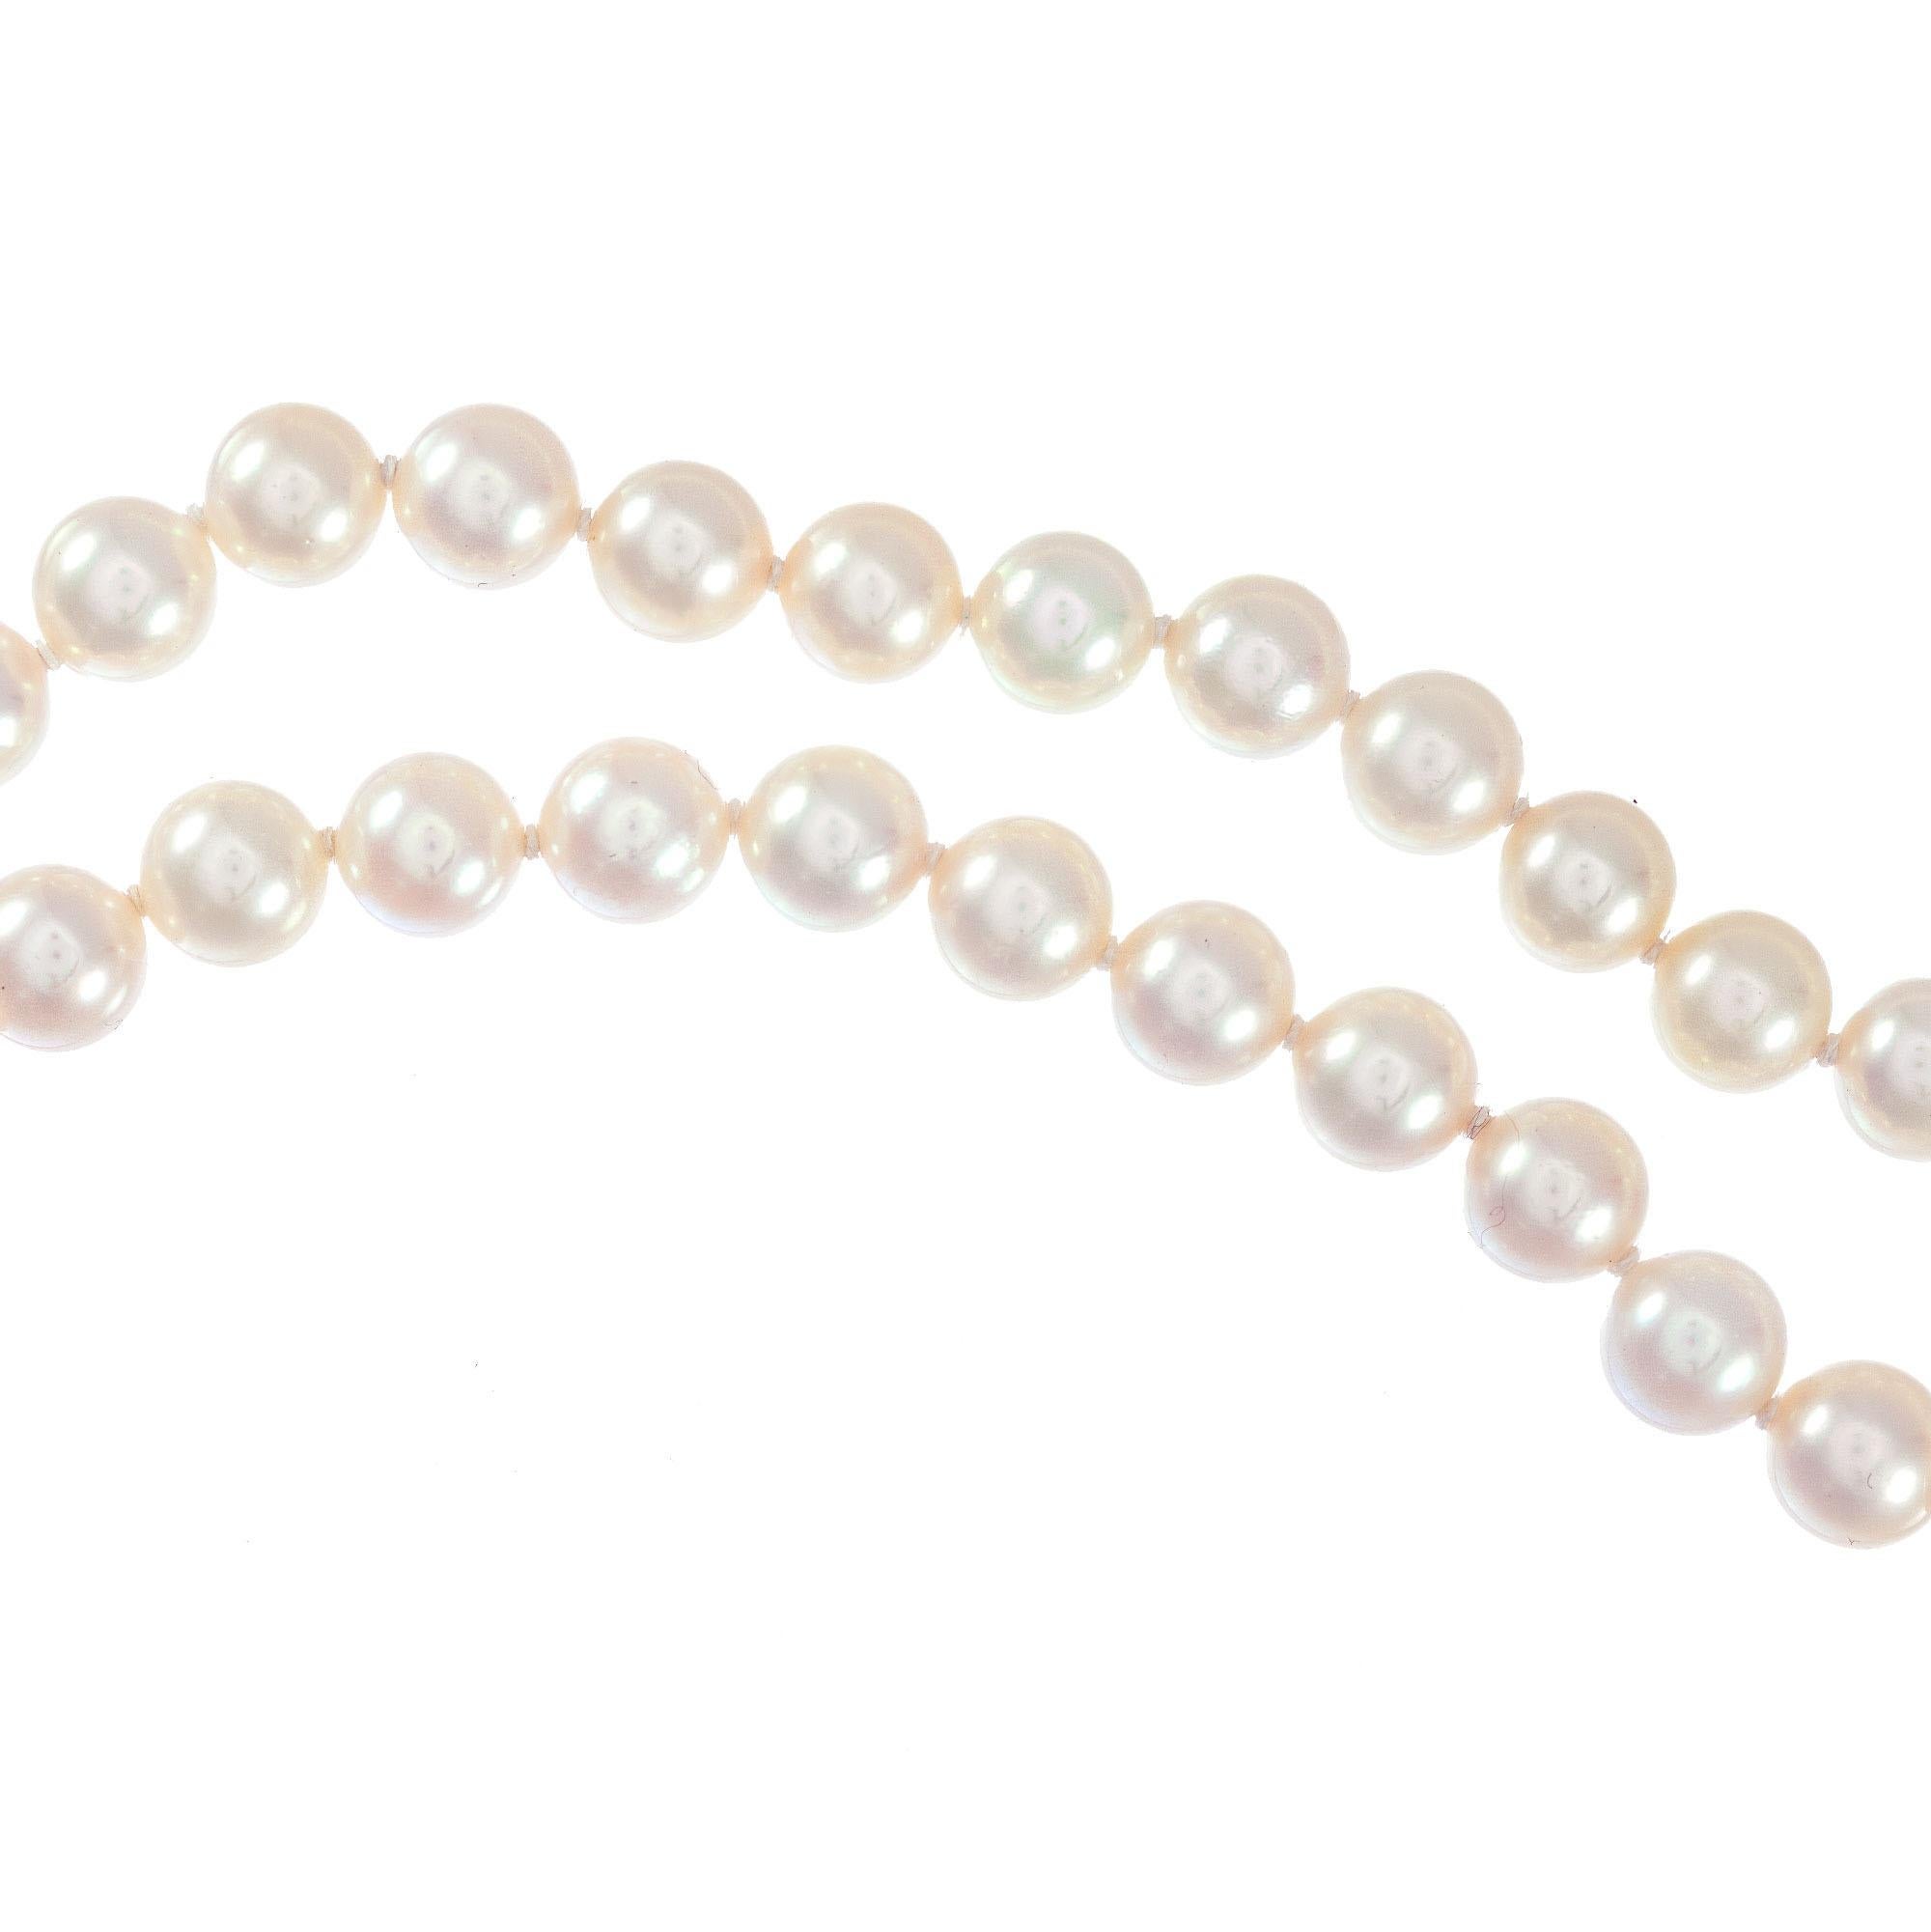 Women's Mikimoto Akoya Cultured Pearl Necklace